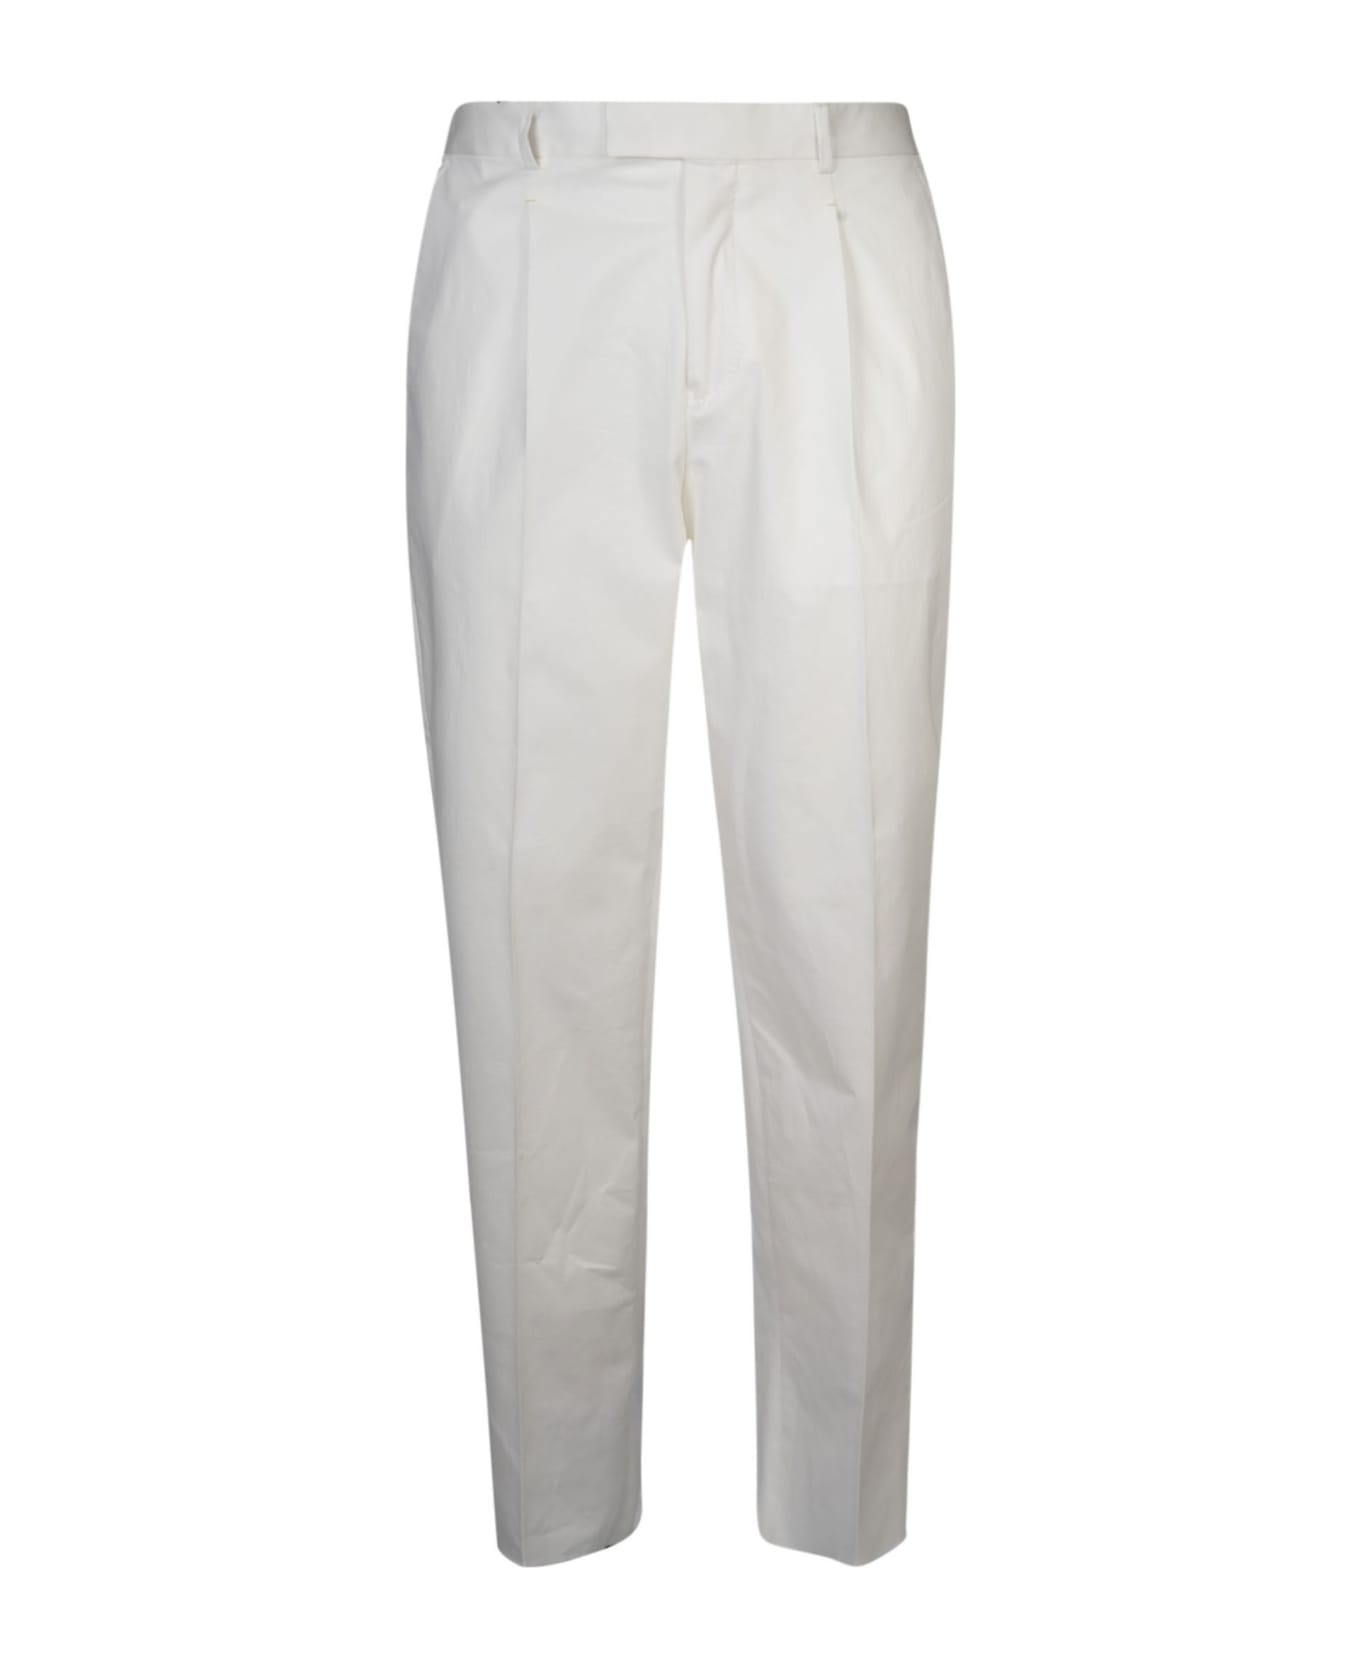 Zegna Wrapped Lock Trousers - C